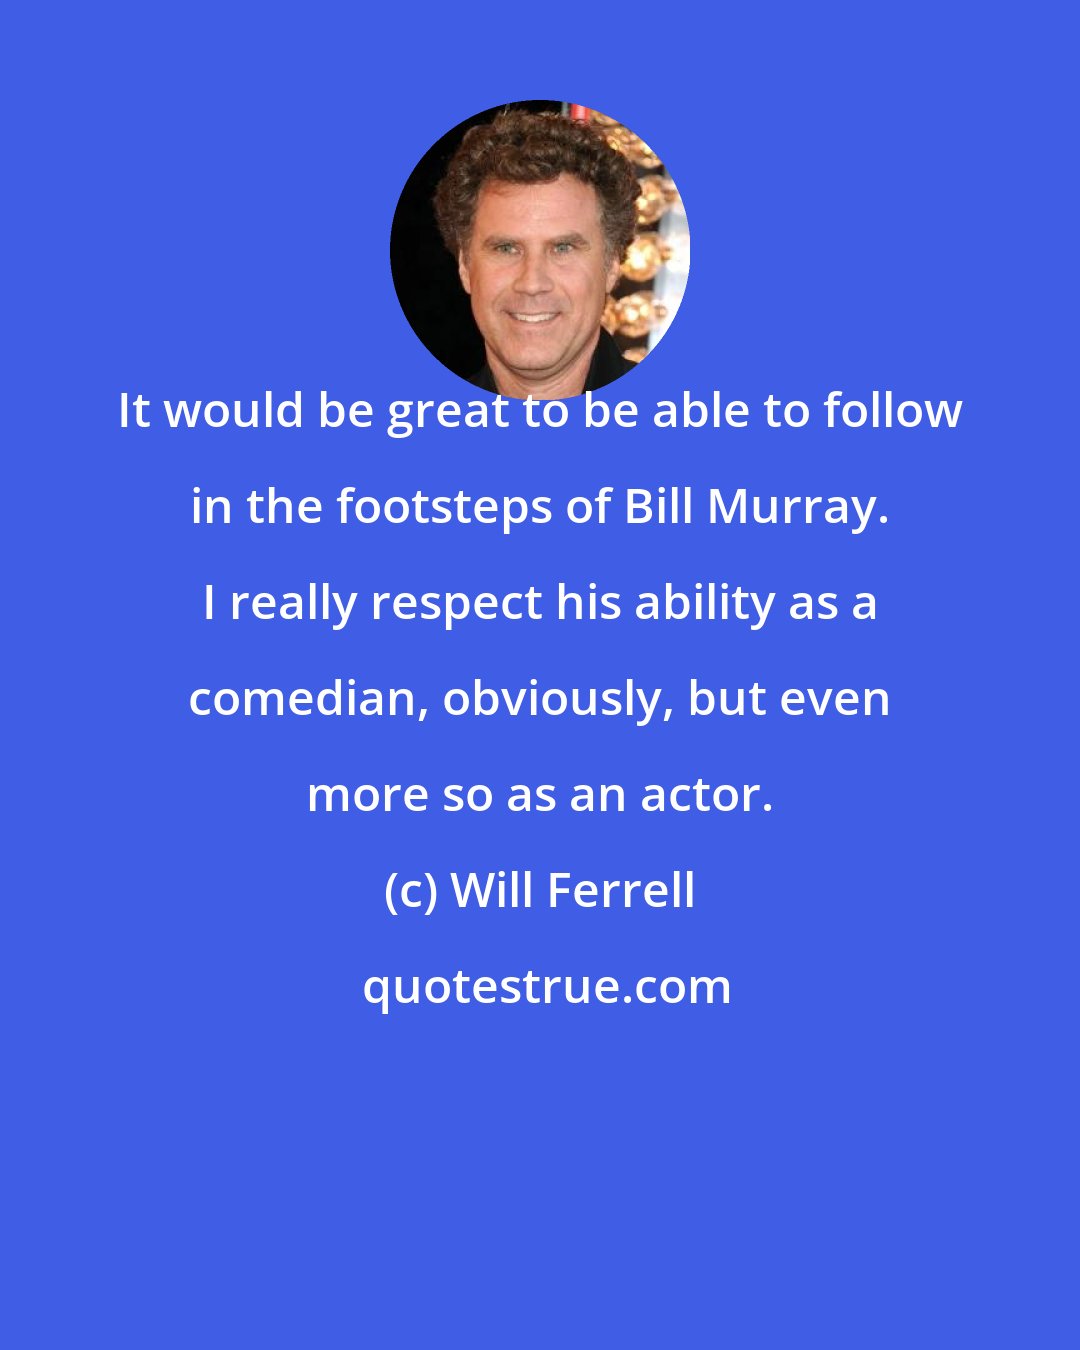 Will Ferrell: It would be great to be able to follow in the footsteps of Bill Murray. I really respect his ability as a comedian, obviously, but even more so as an actor.